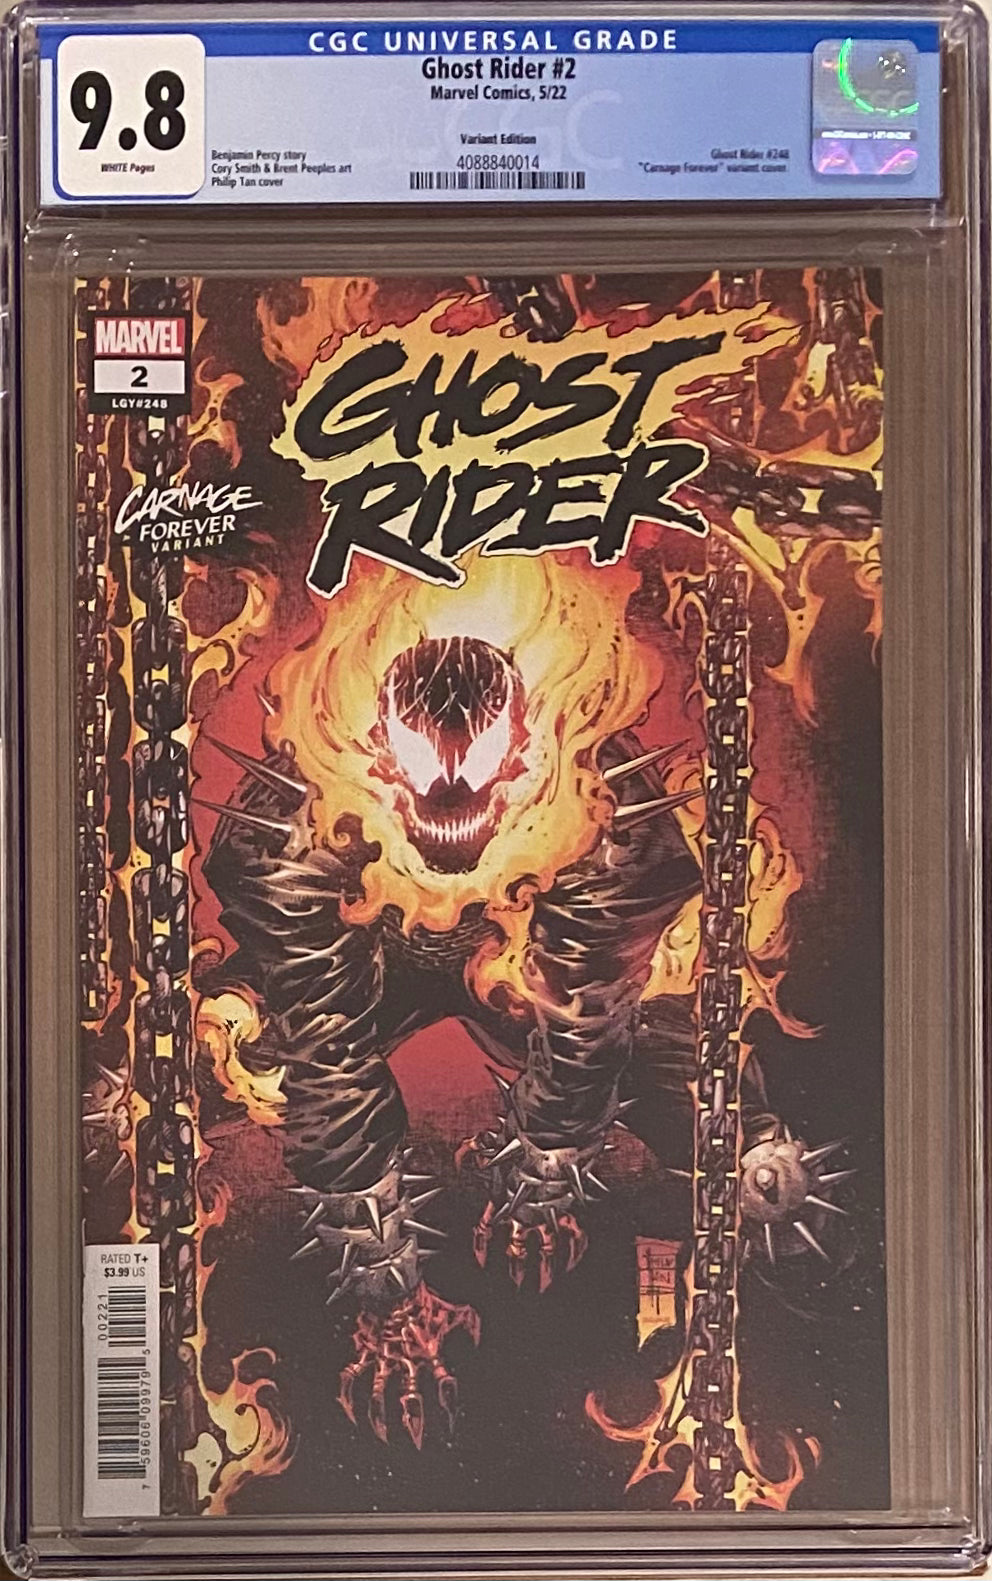 Ghost Rider #2 Tan Carnage Forever Variant CGC 9.8